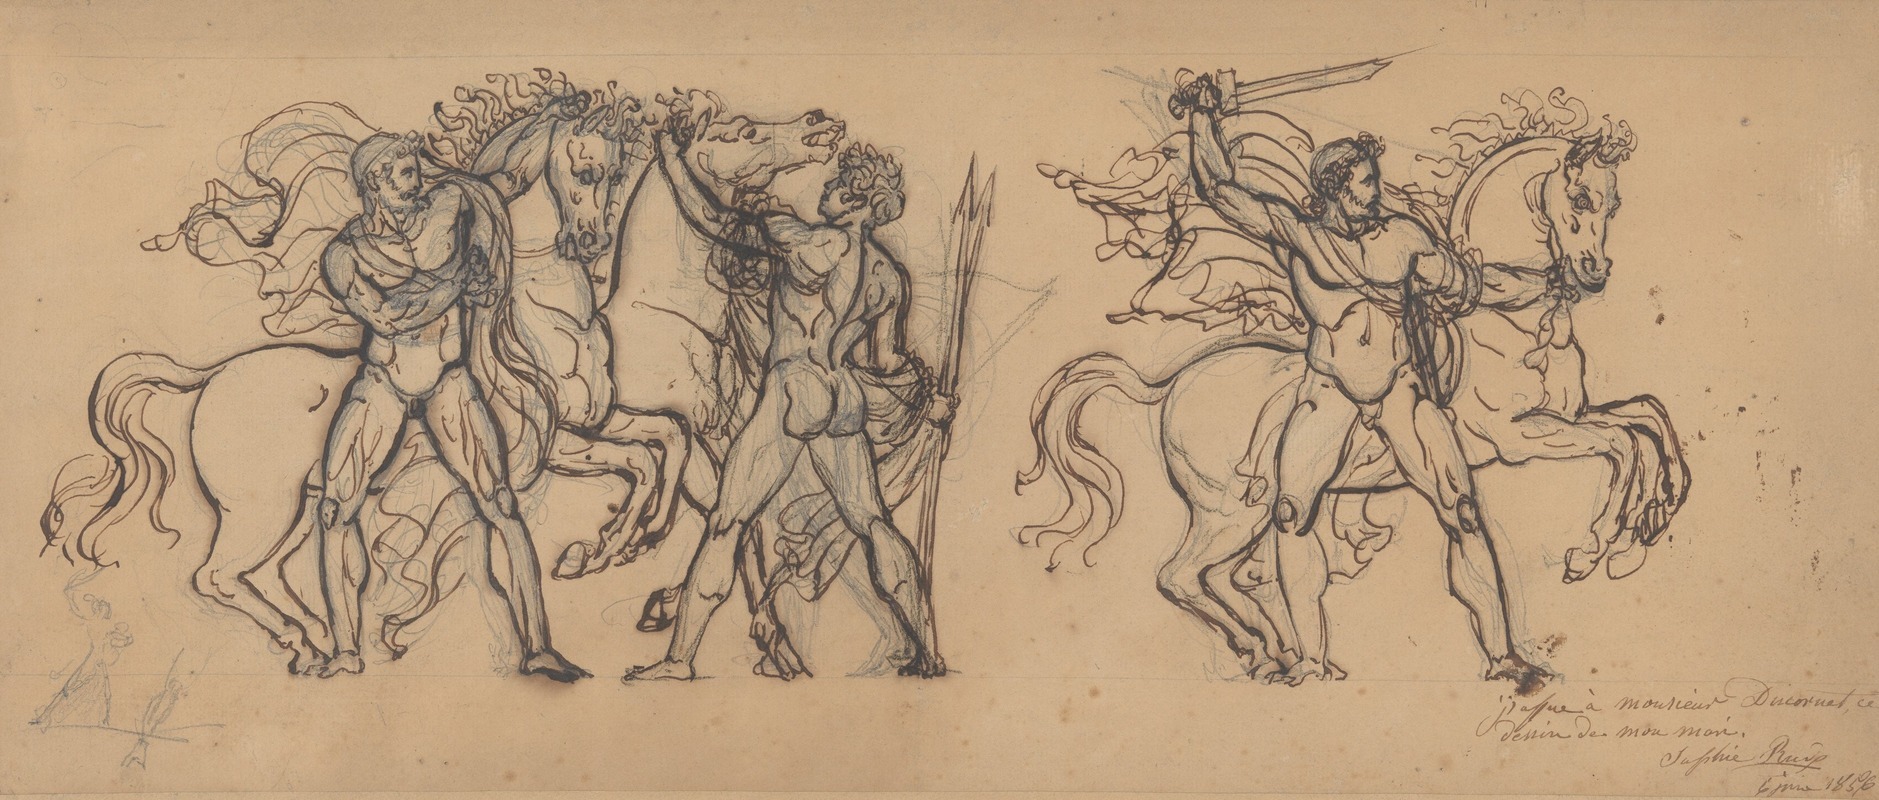 François Rude - Three Warriors and Their Horses, Study for a Bas Relief Sculpture in the Chateau de Tervueren